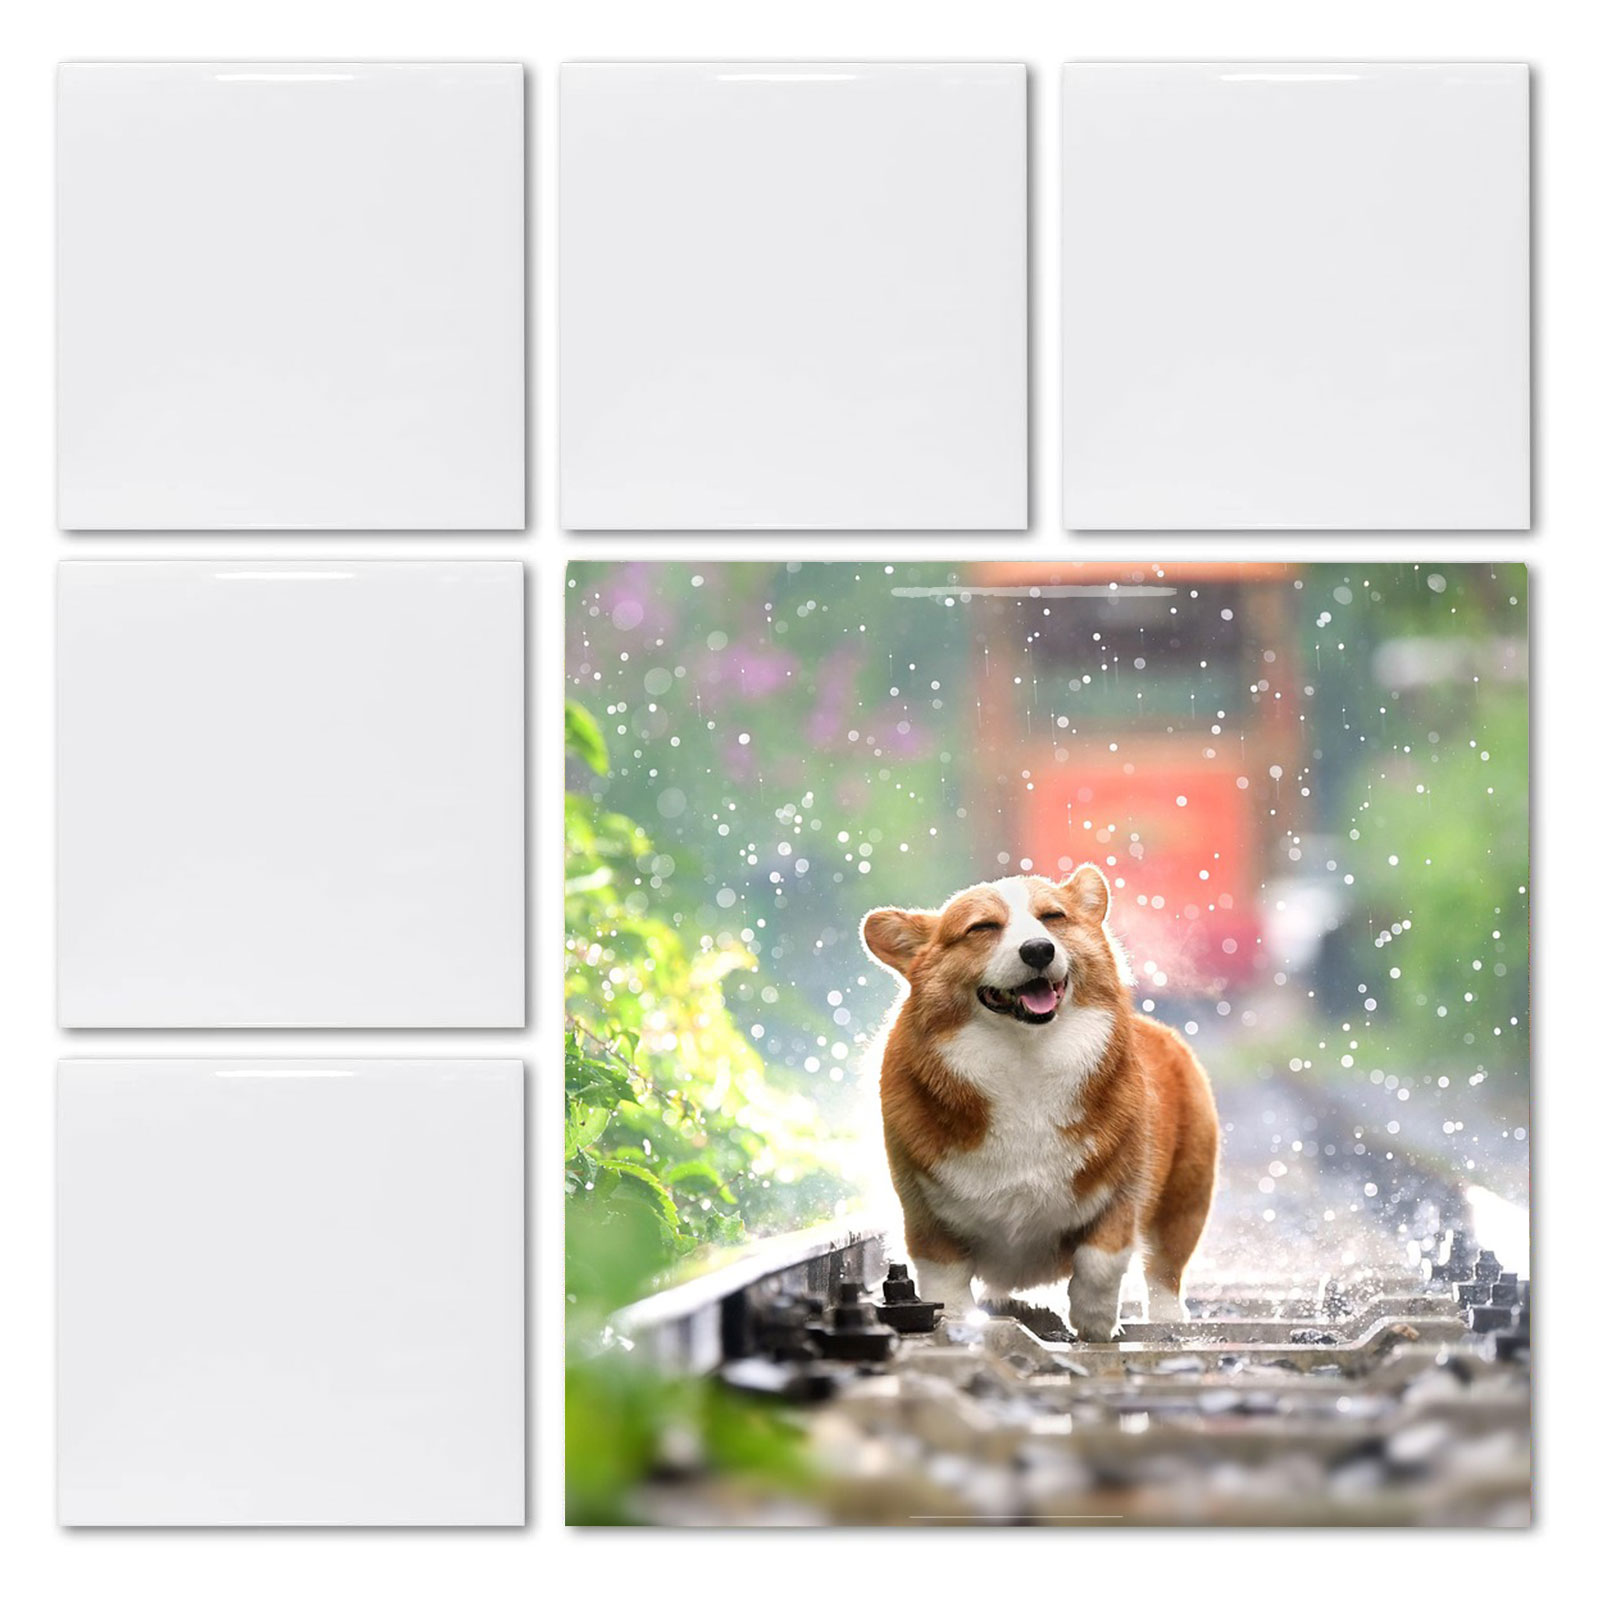 20pcs 4" x 4" Sublimation Blank White Square Glossy Tile Dye Heat Transfer Thermal Craft Custom